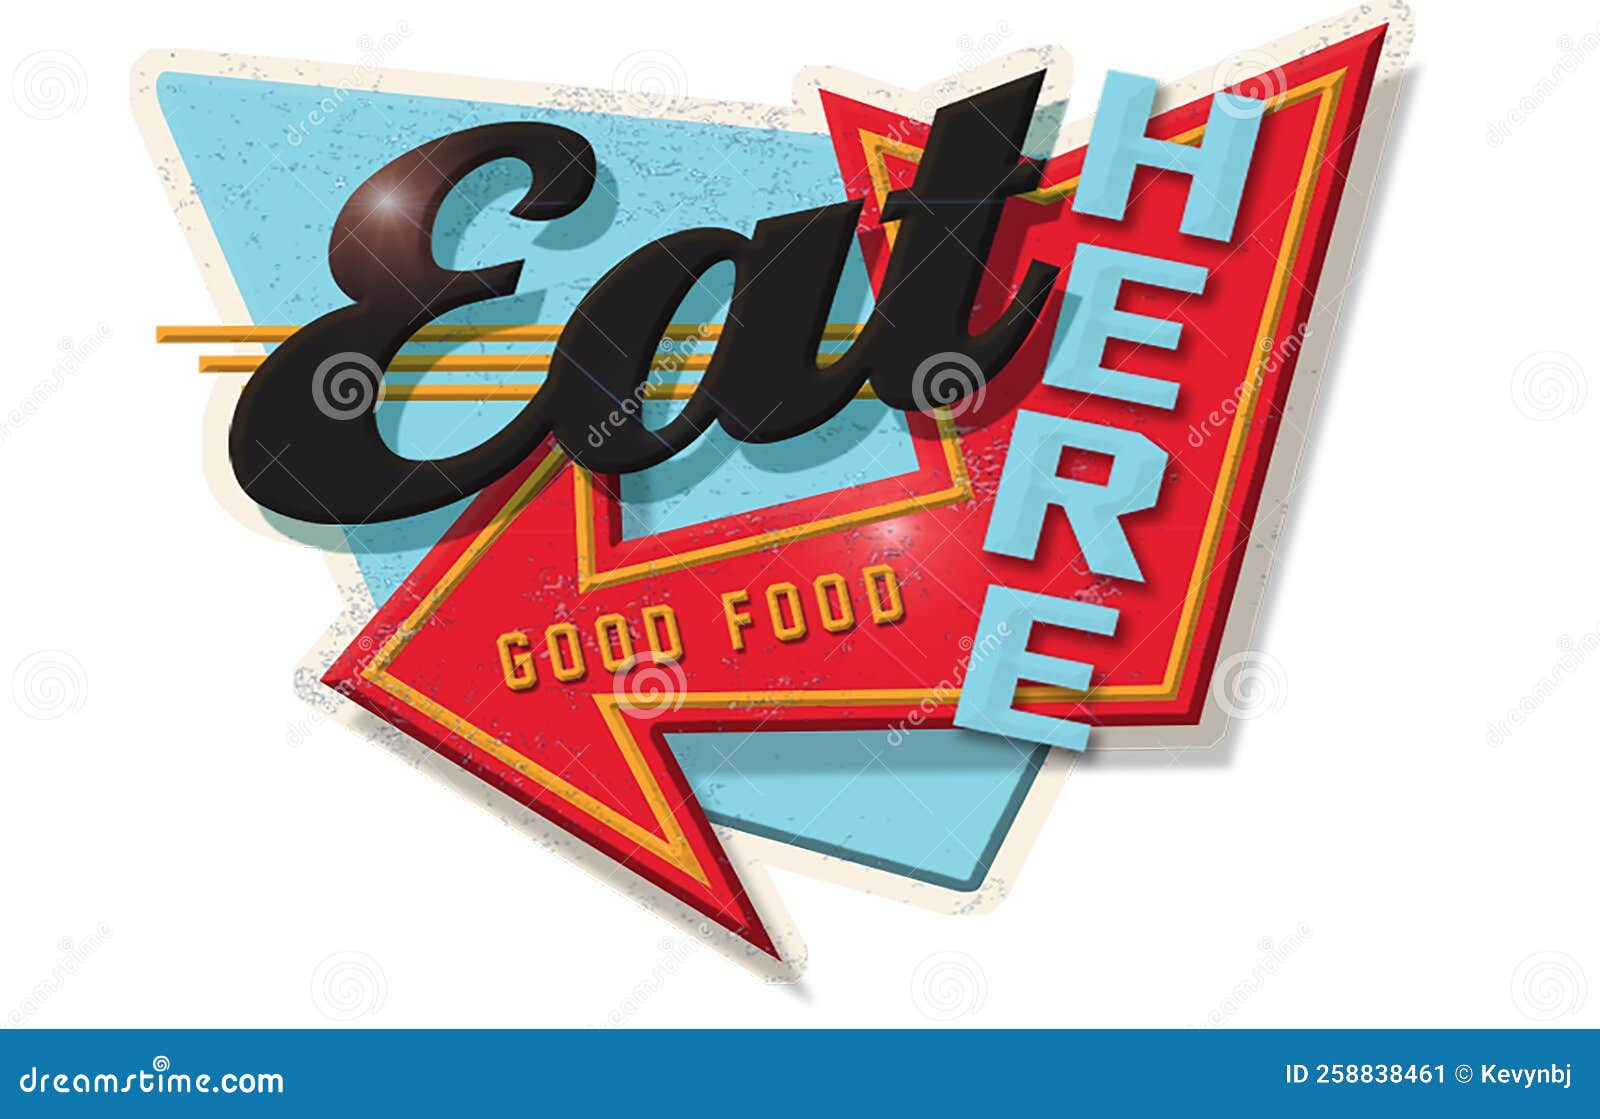 eat here vintage sign with arrow 50s diner style